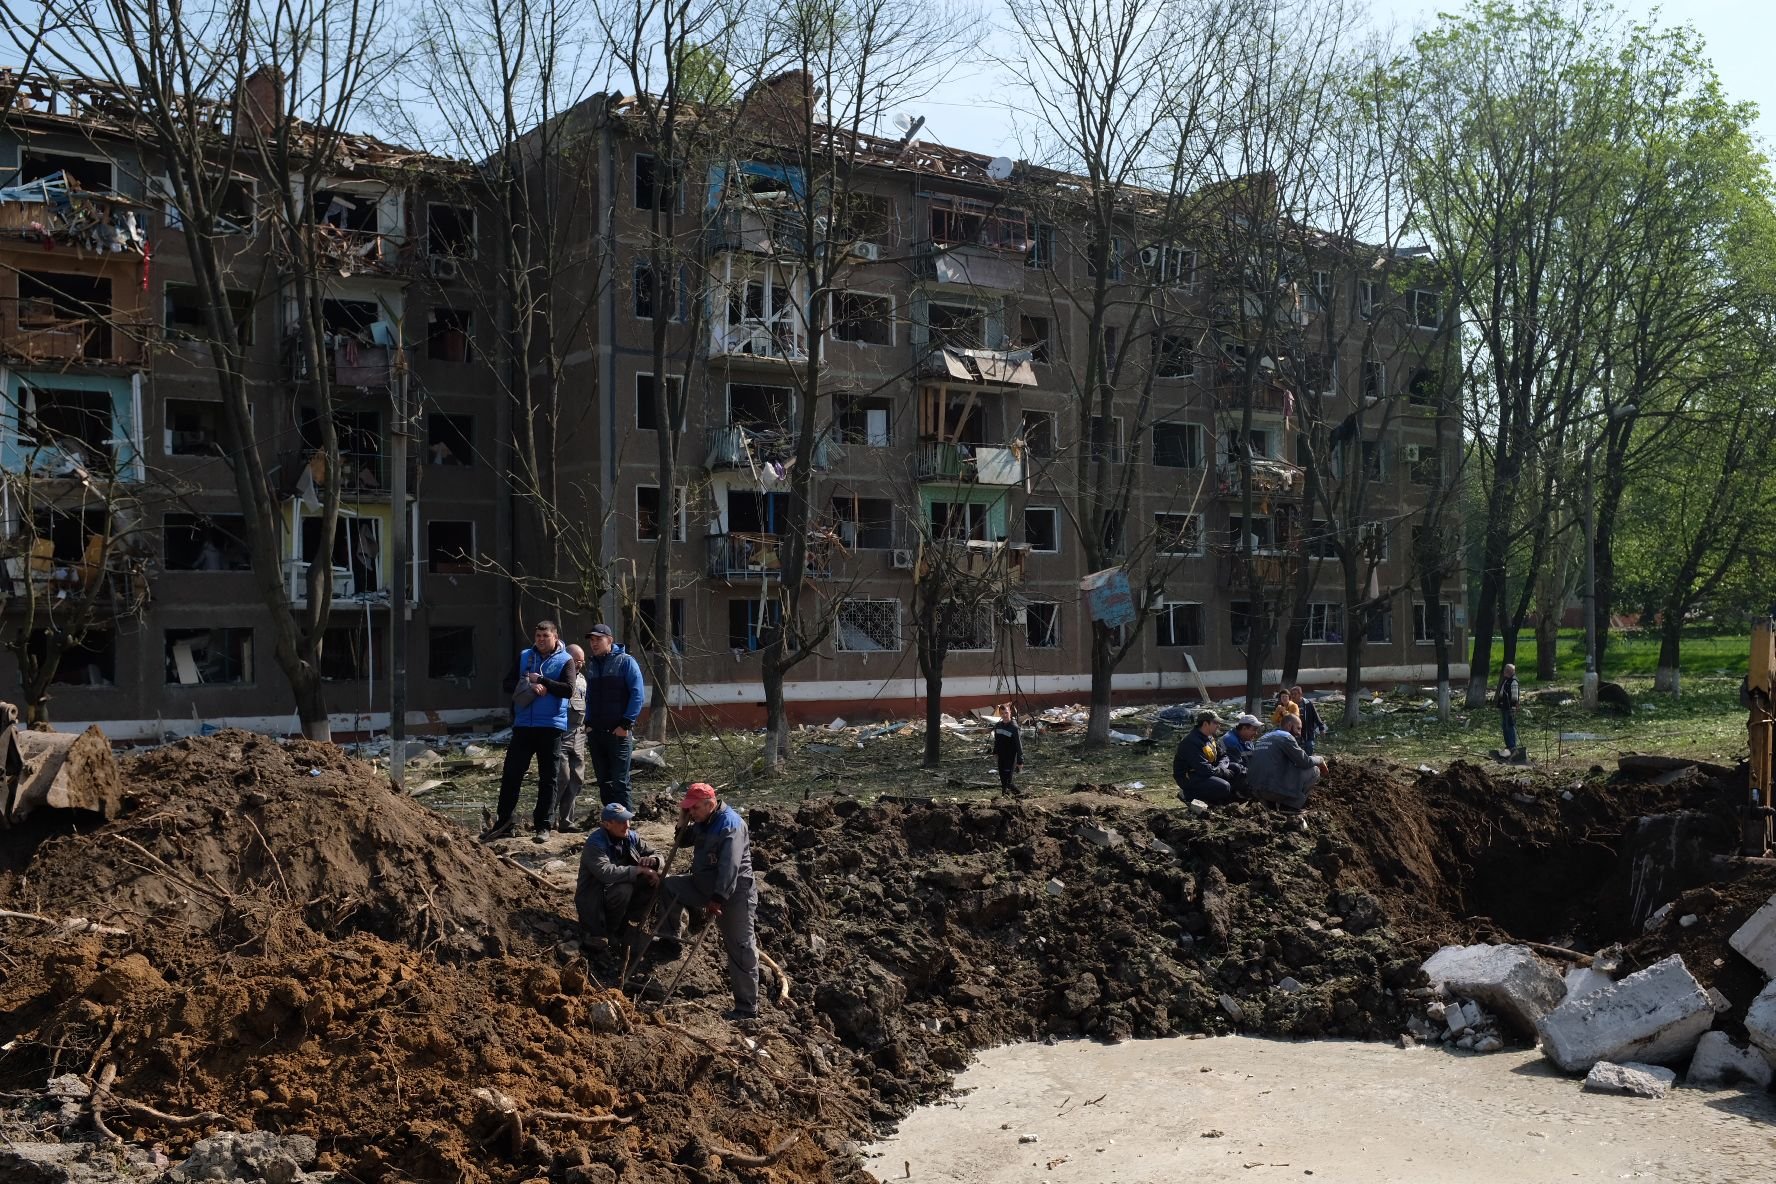 The aftermath of Russian strikes on a residential area in Kramatorsk, Ukraine, on May 5.